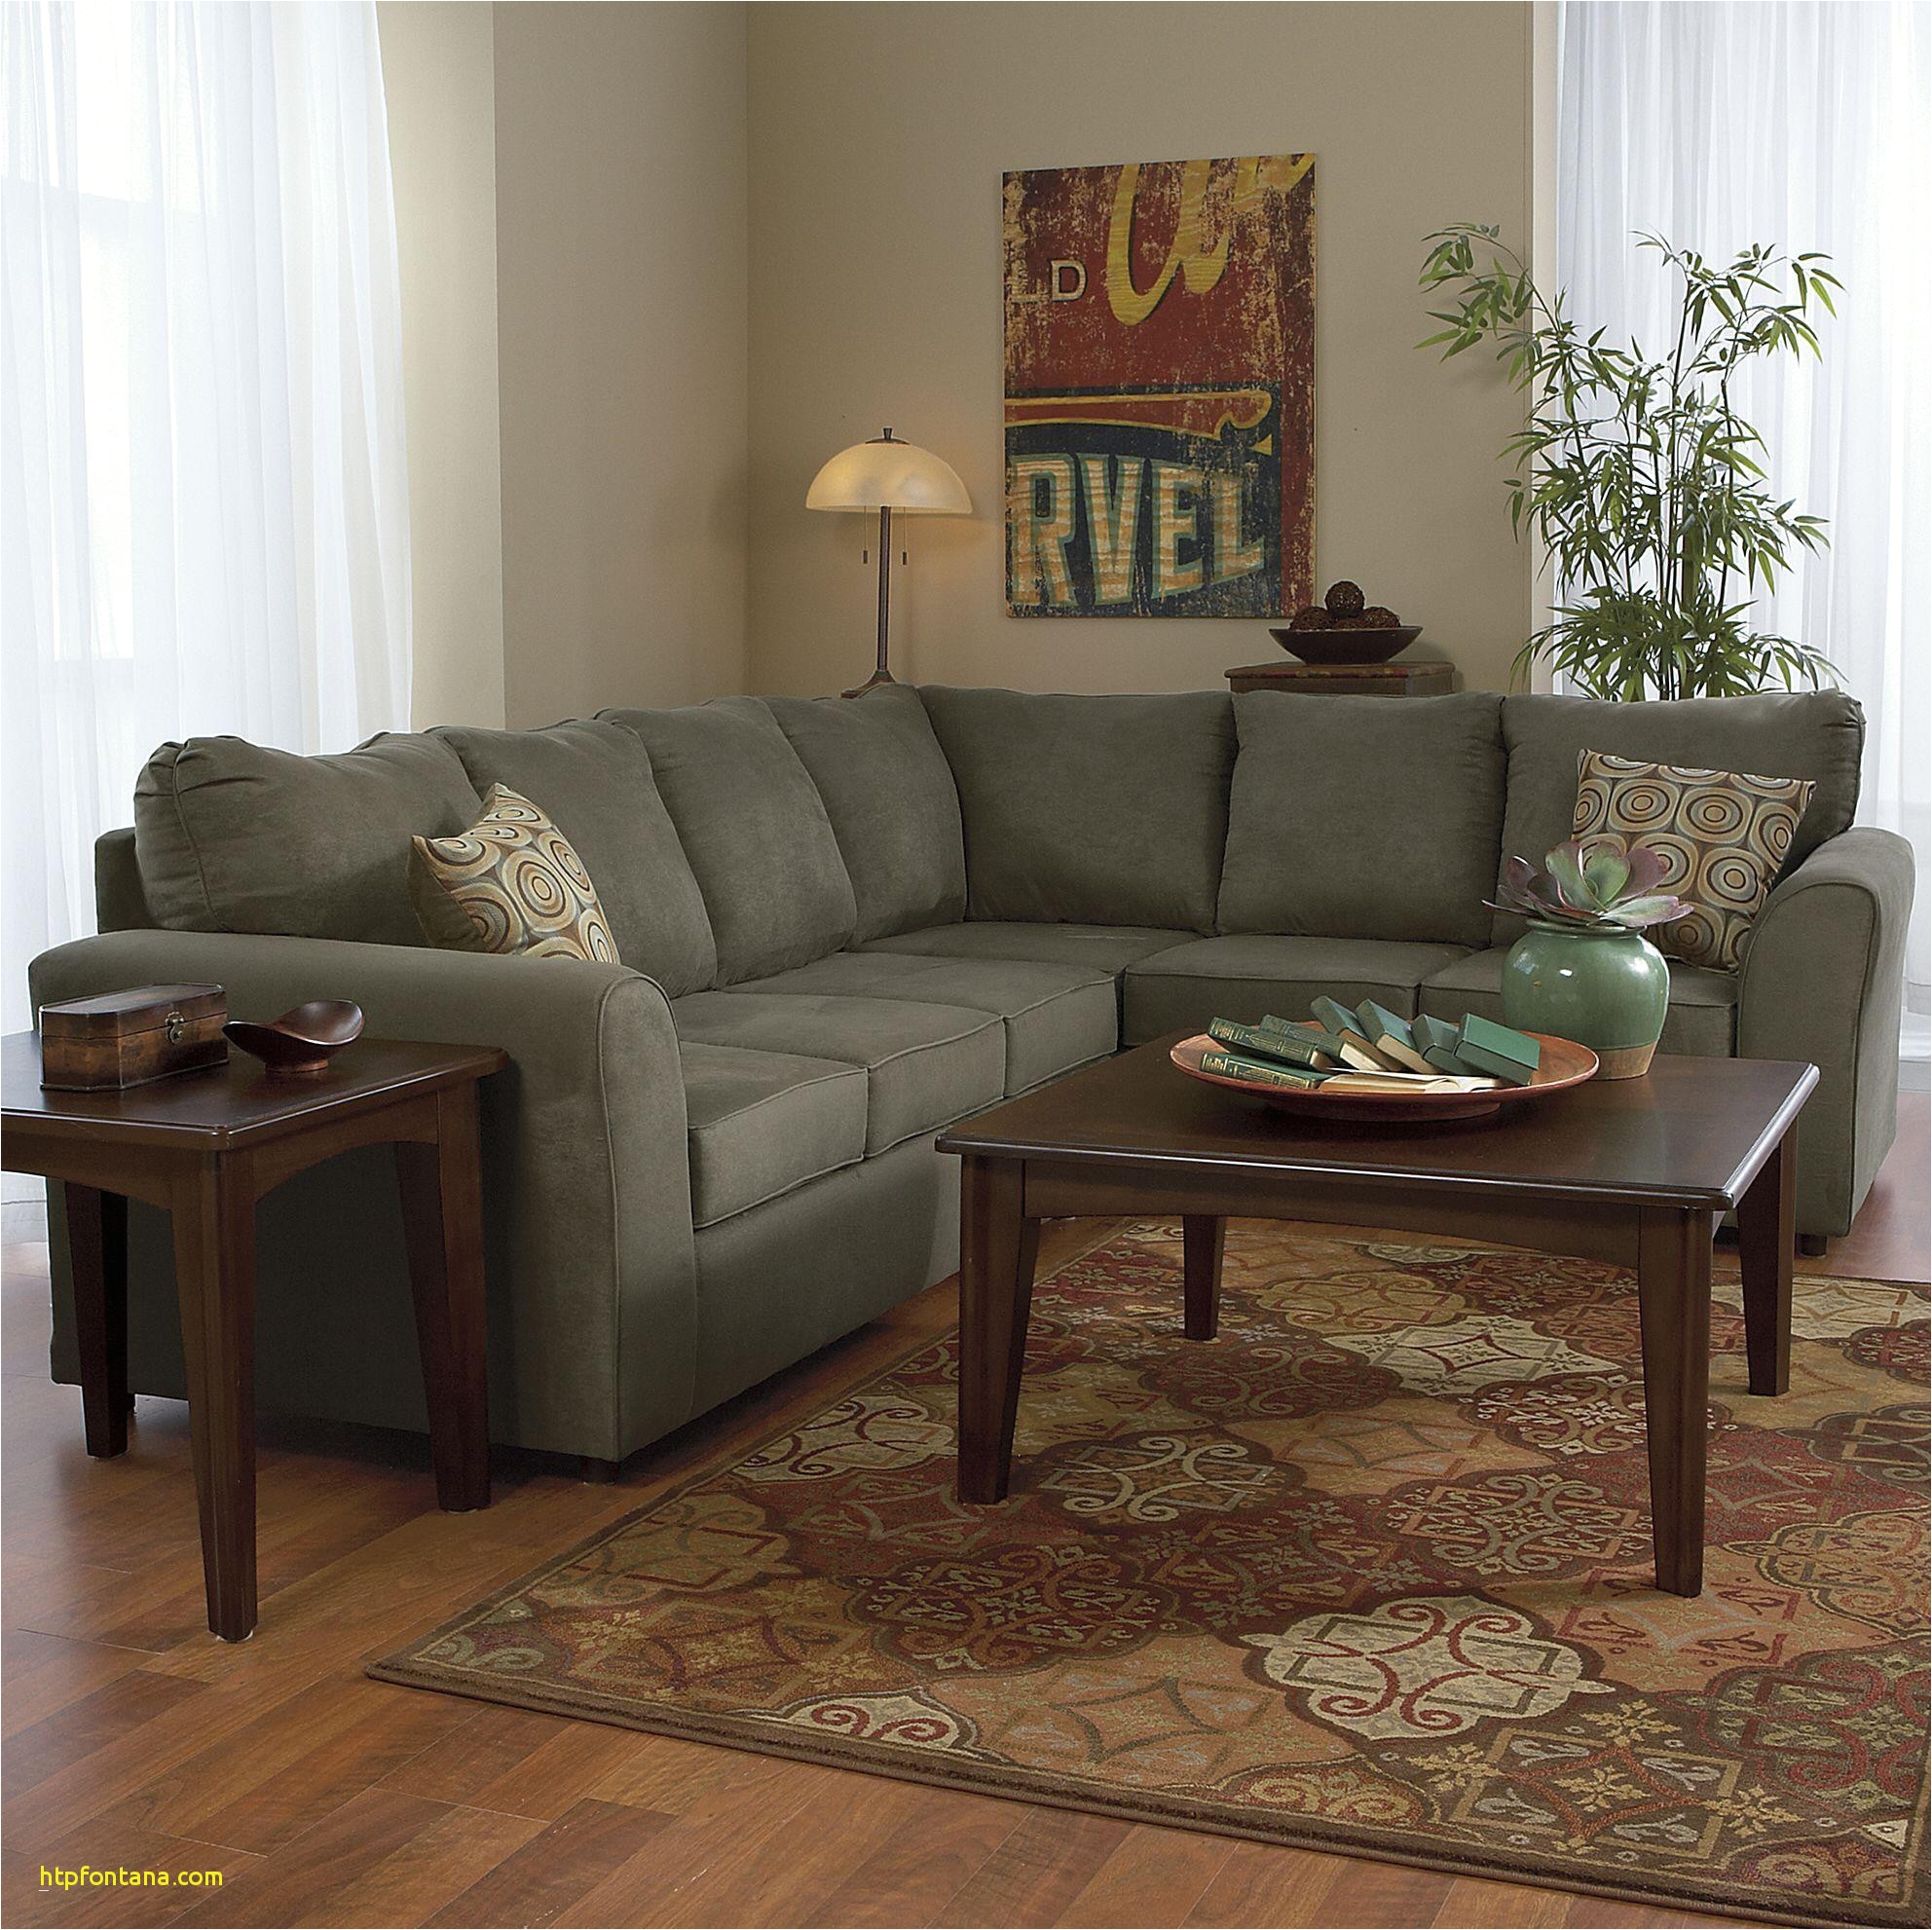 living room coffee table for sale Collection Living Room Design Image Fresh Furniture Sleeper Loveseat